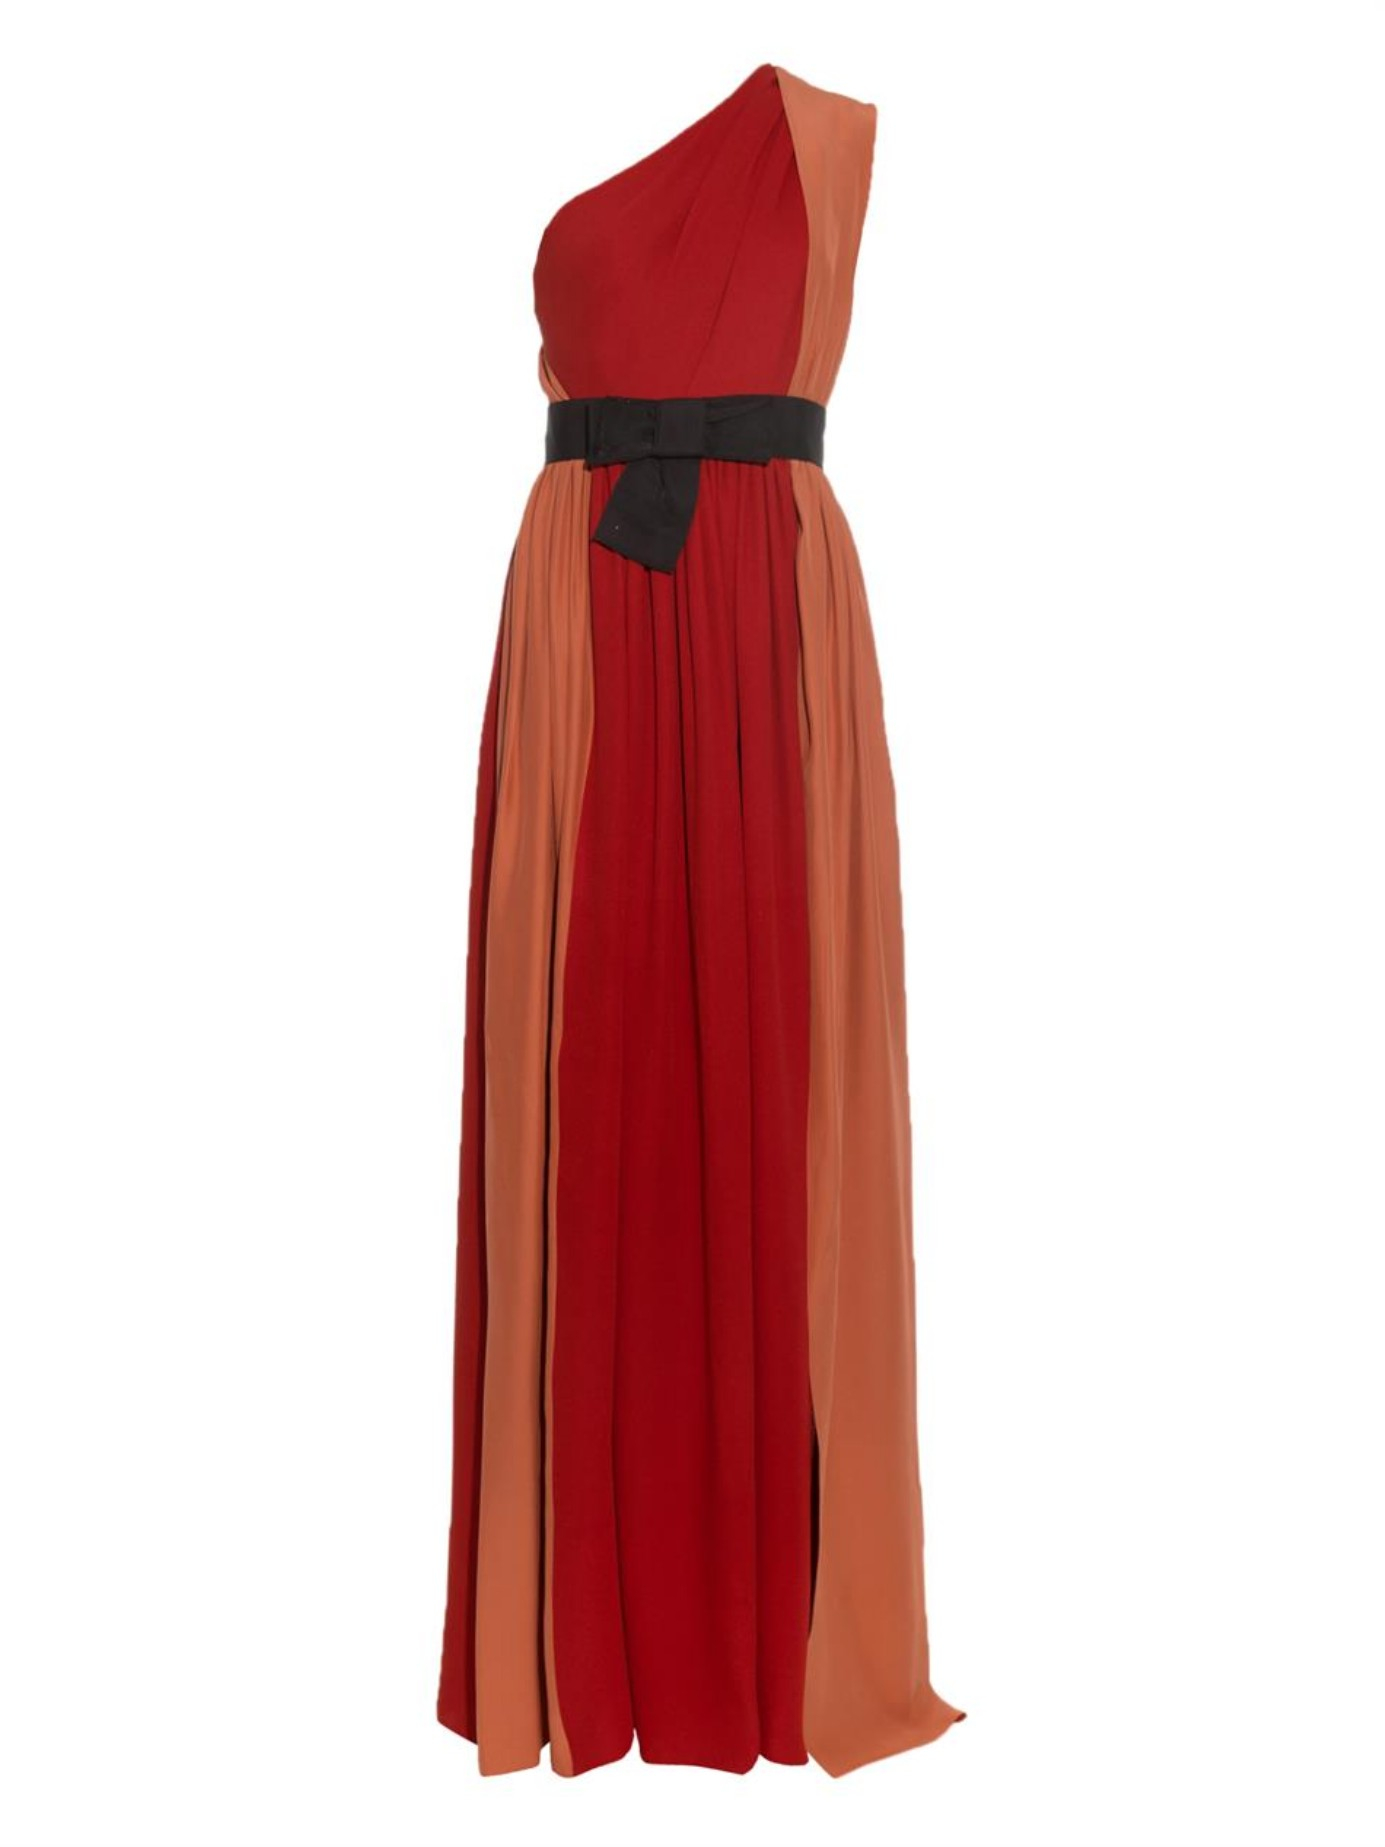 Lyst - Lanvin One-shoulder Silk-crepe Gown in Red